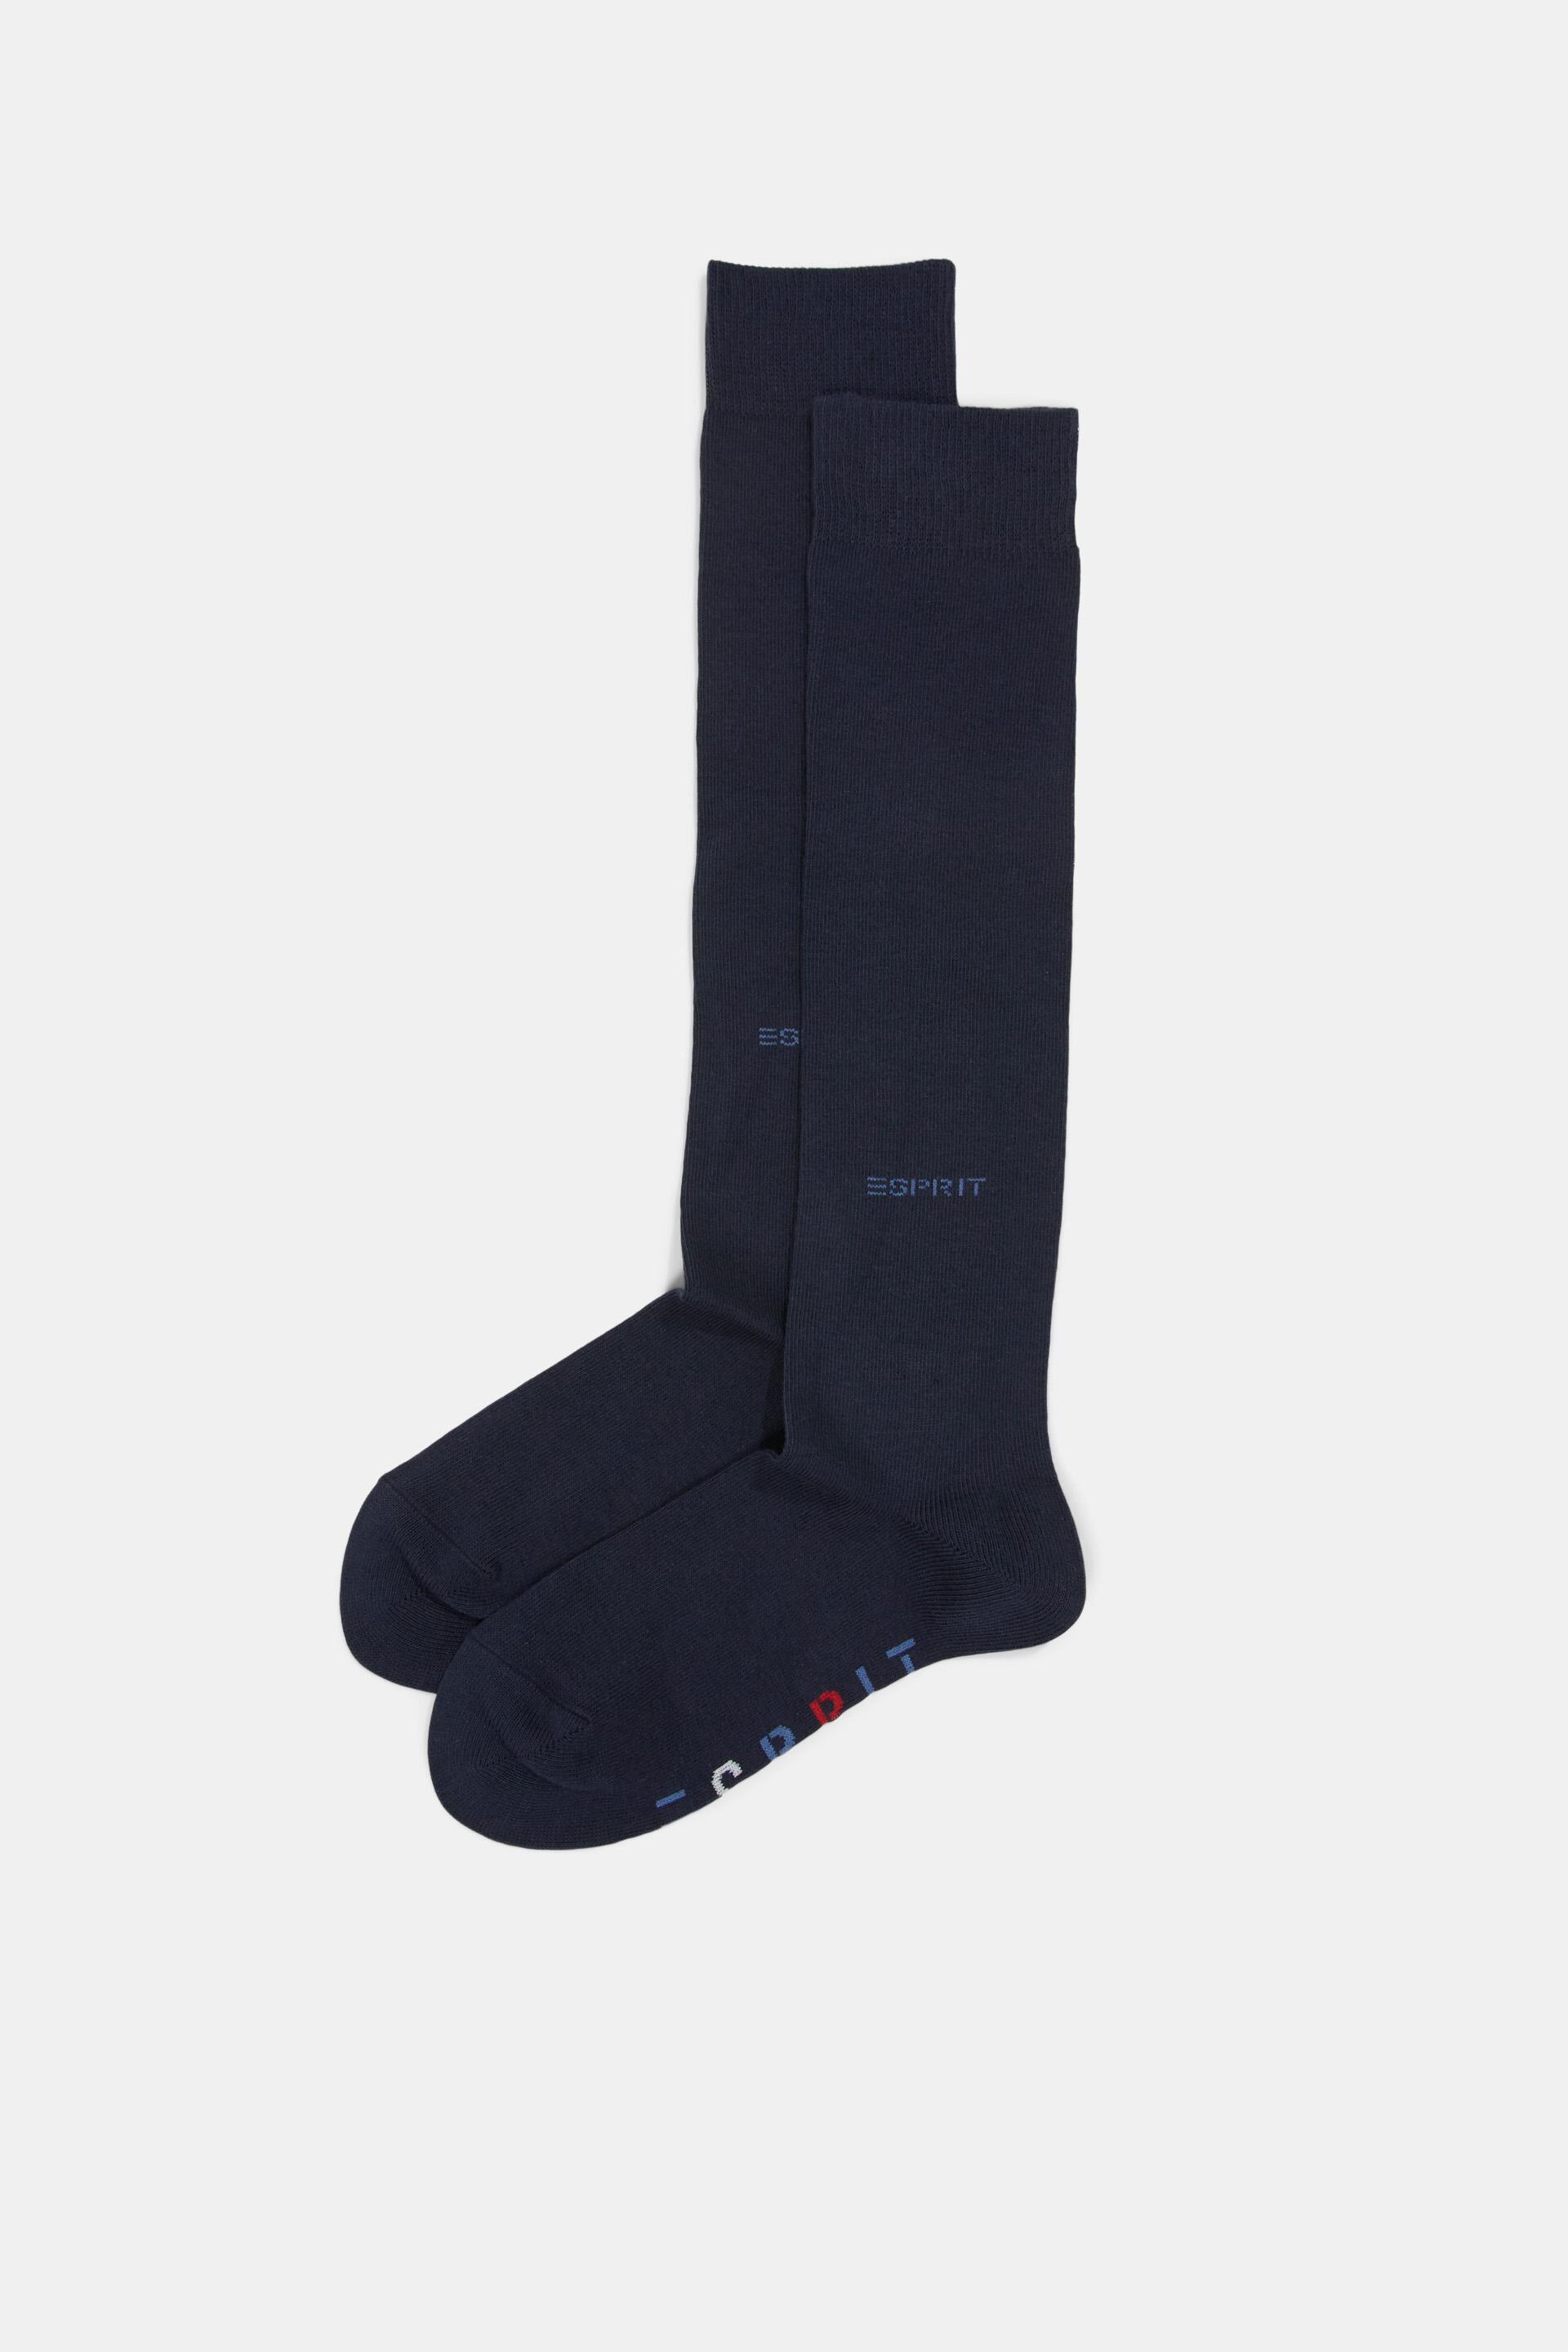 Esprit with Double socks of knee-high pack logo a